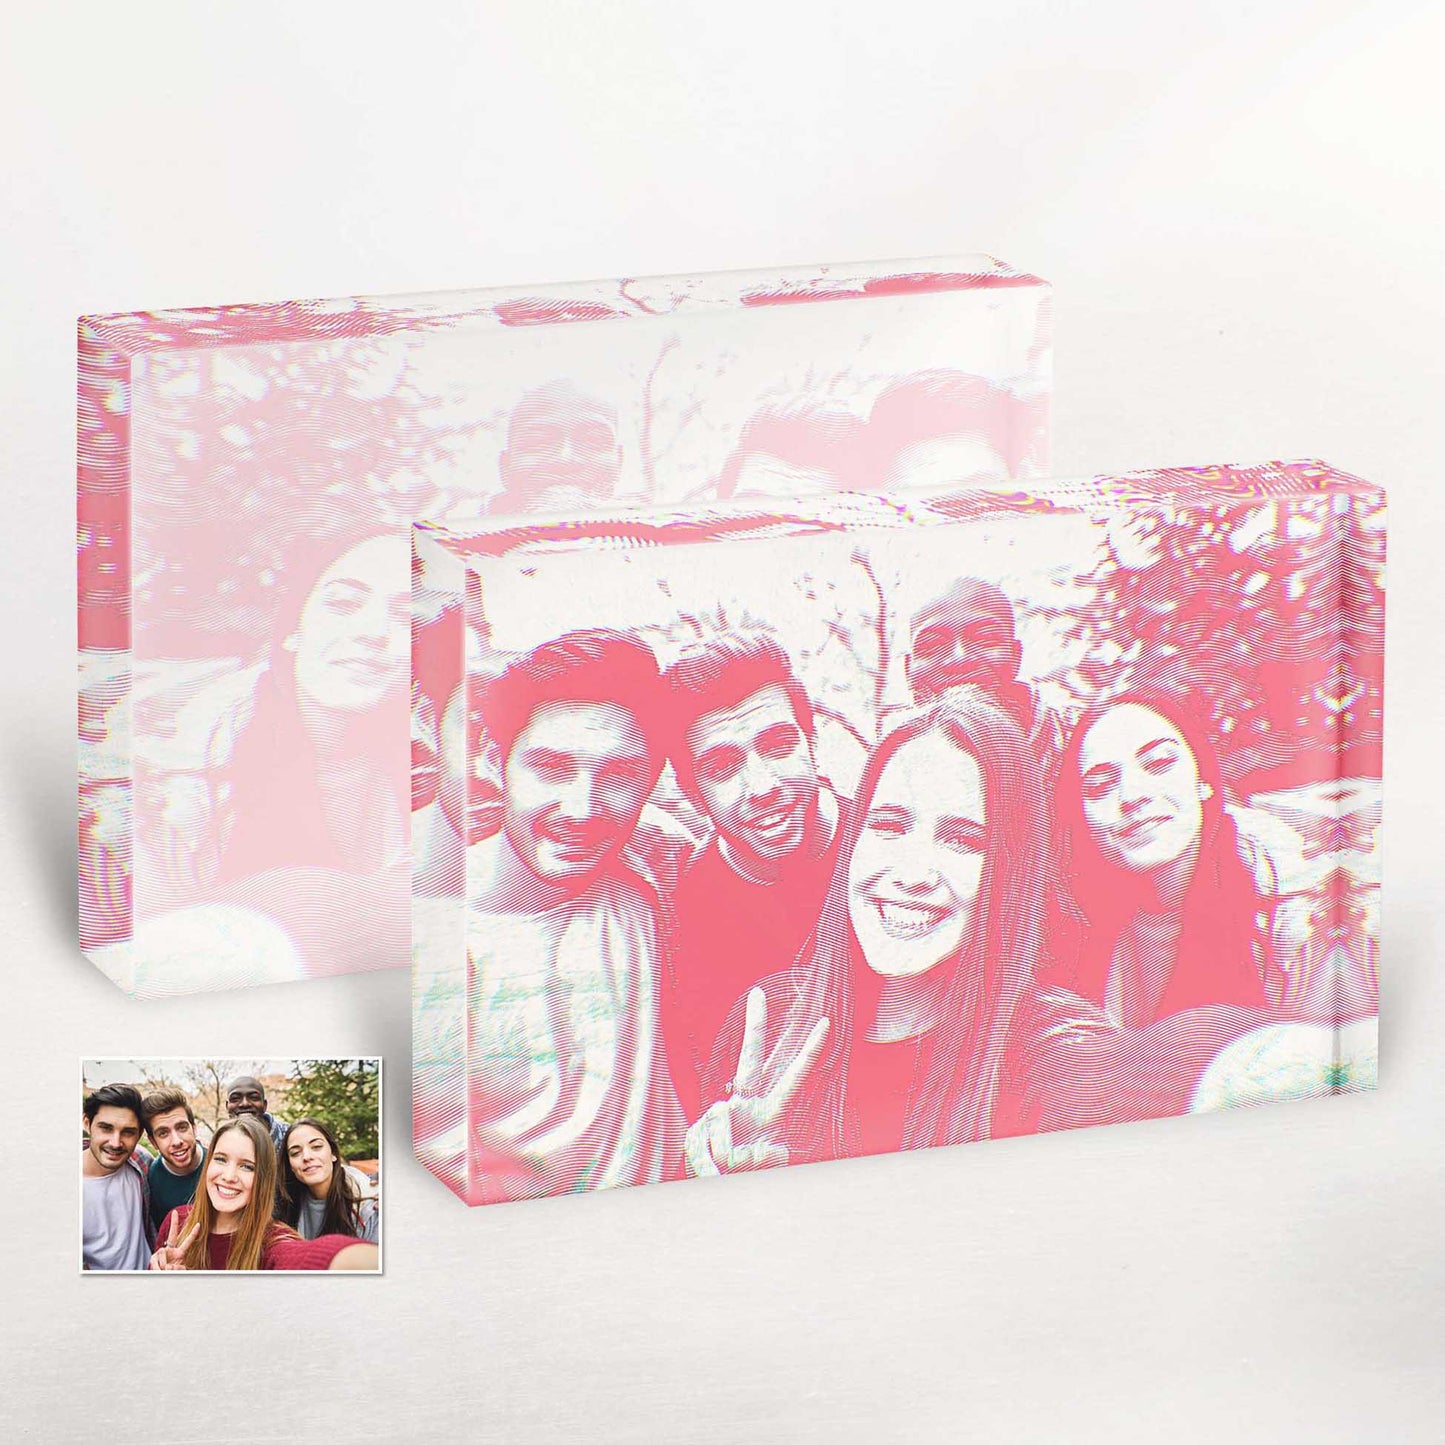 Make a statement with our Personalised Pink Engraving Acrylic Block Photo. Its minimalist design and vibrant pink color make it an exciting novelty gift for anniversaries, birthdays, or any special occasion. Give a gift that is both stylish and heartfelt.